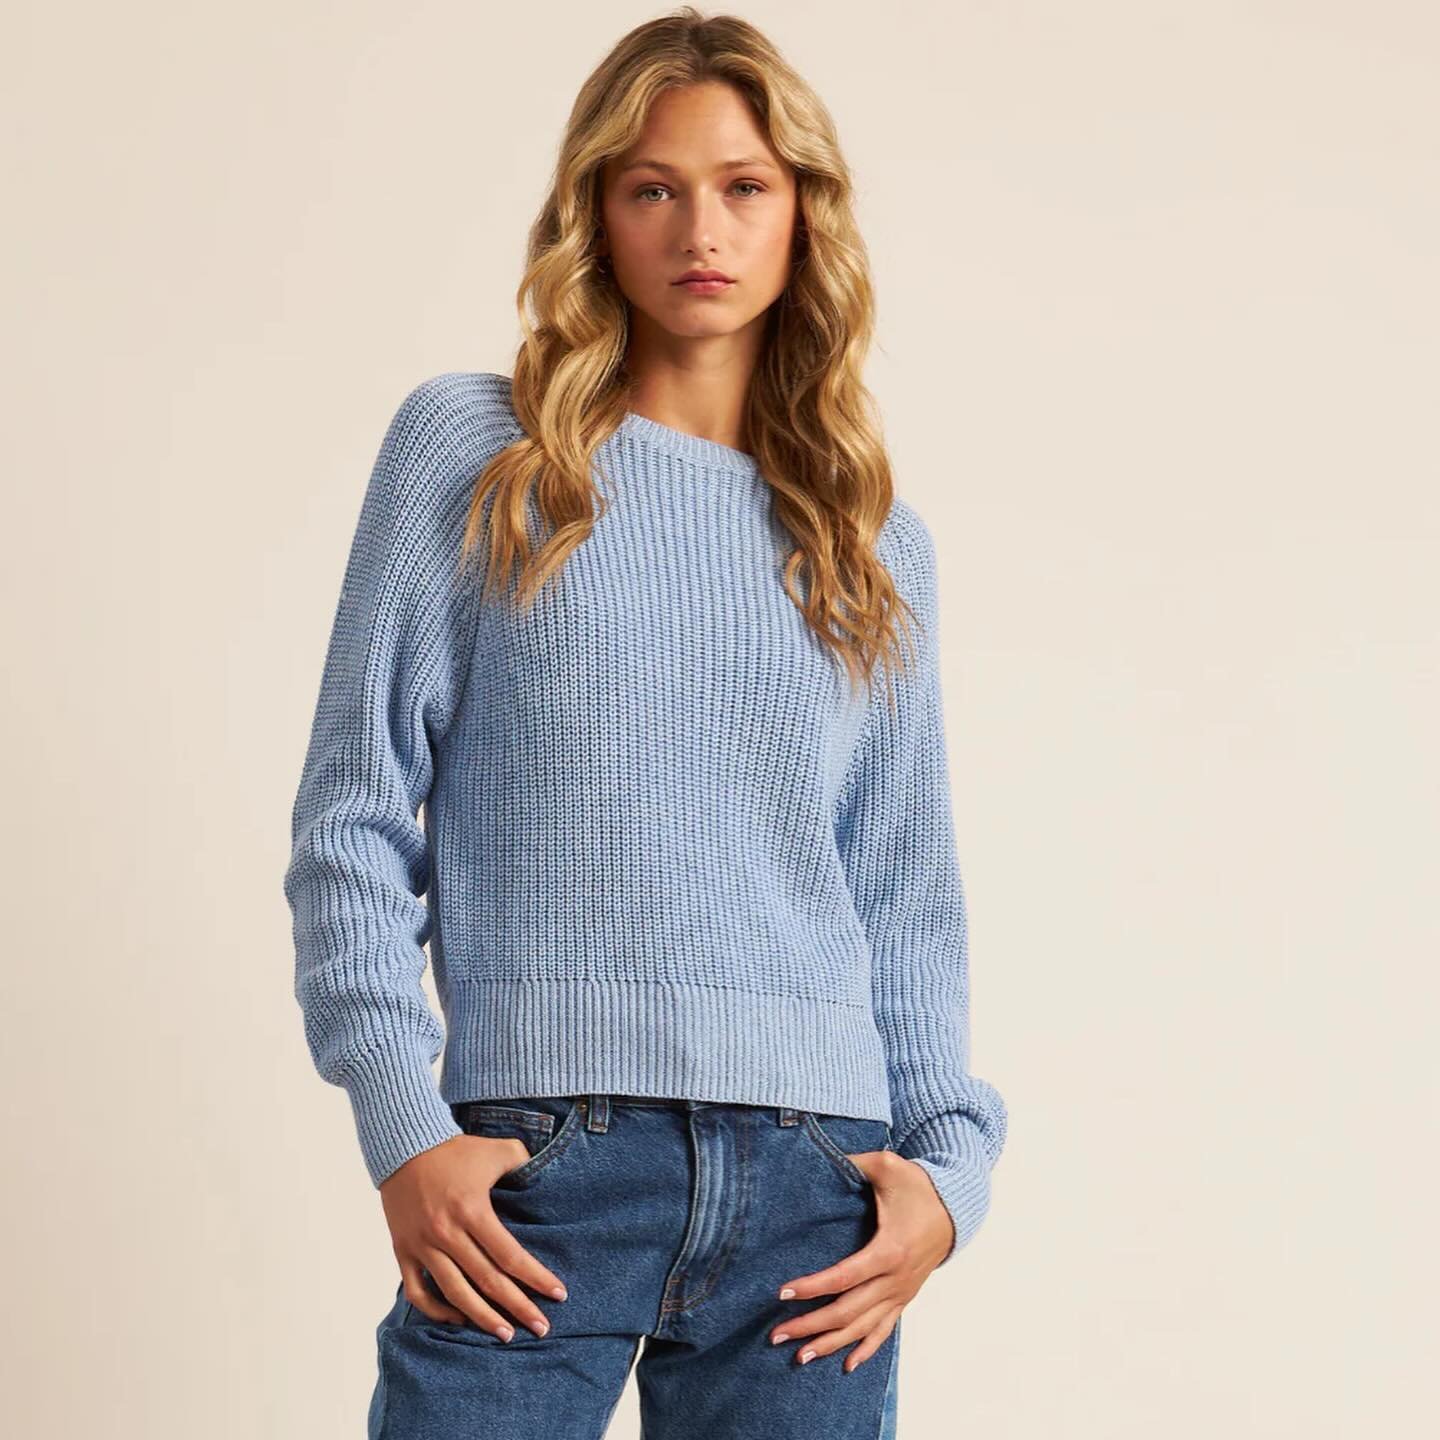 New cotton knits from @johnandjenncollection 💙